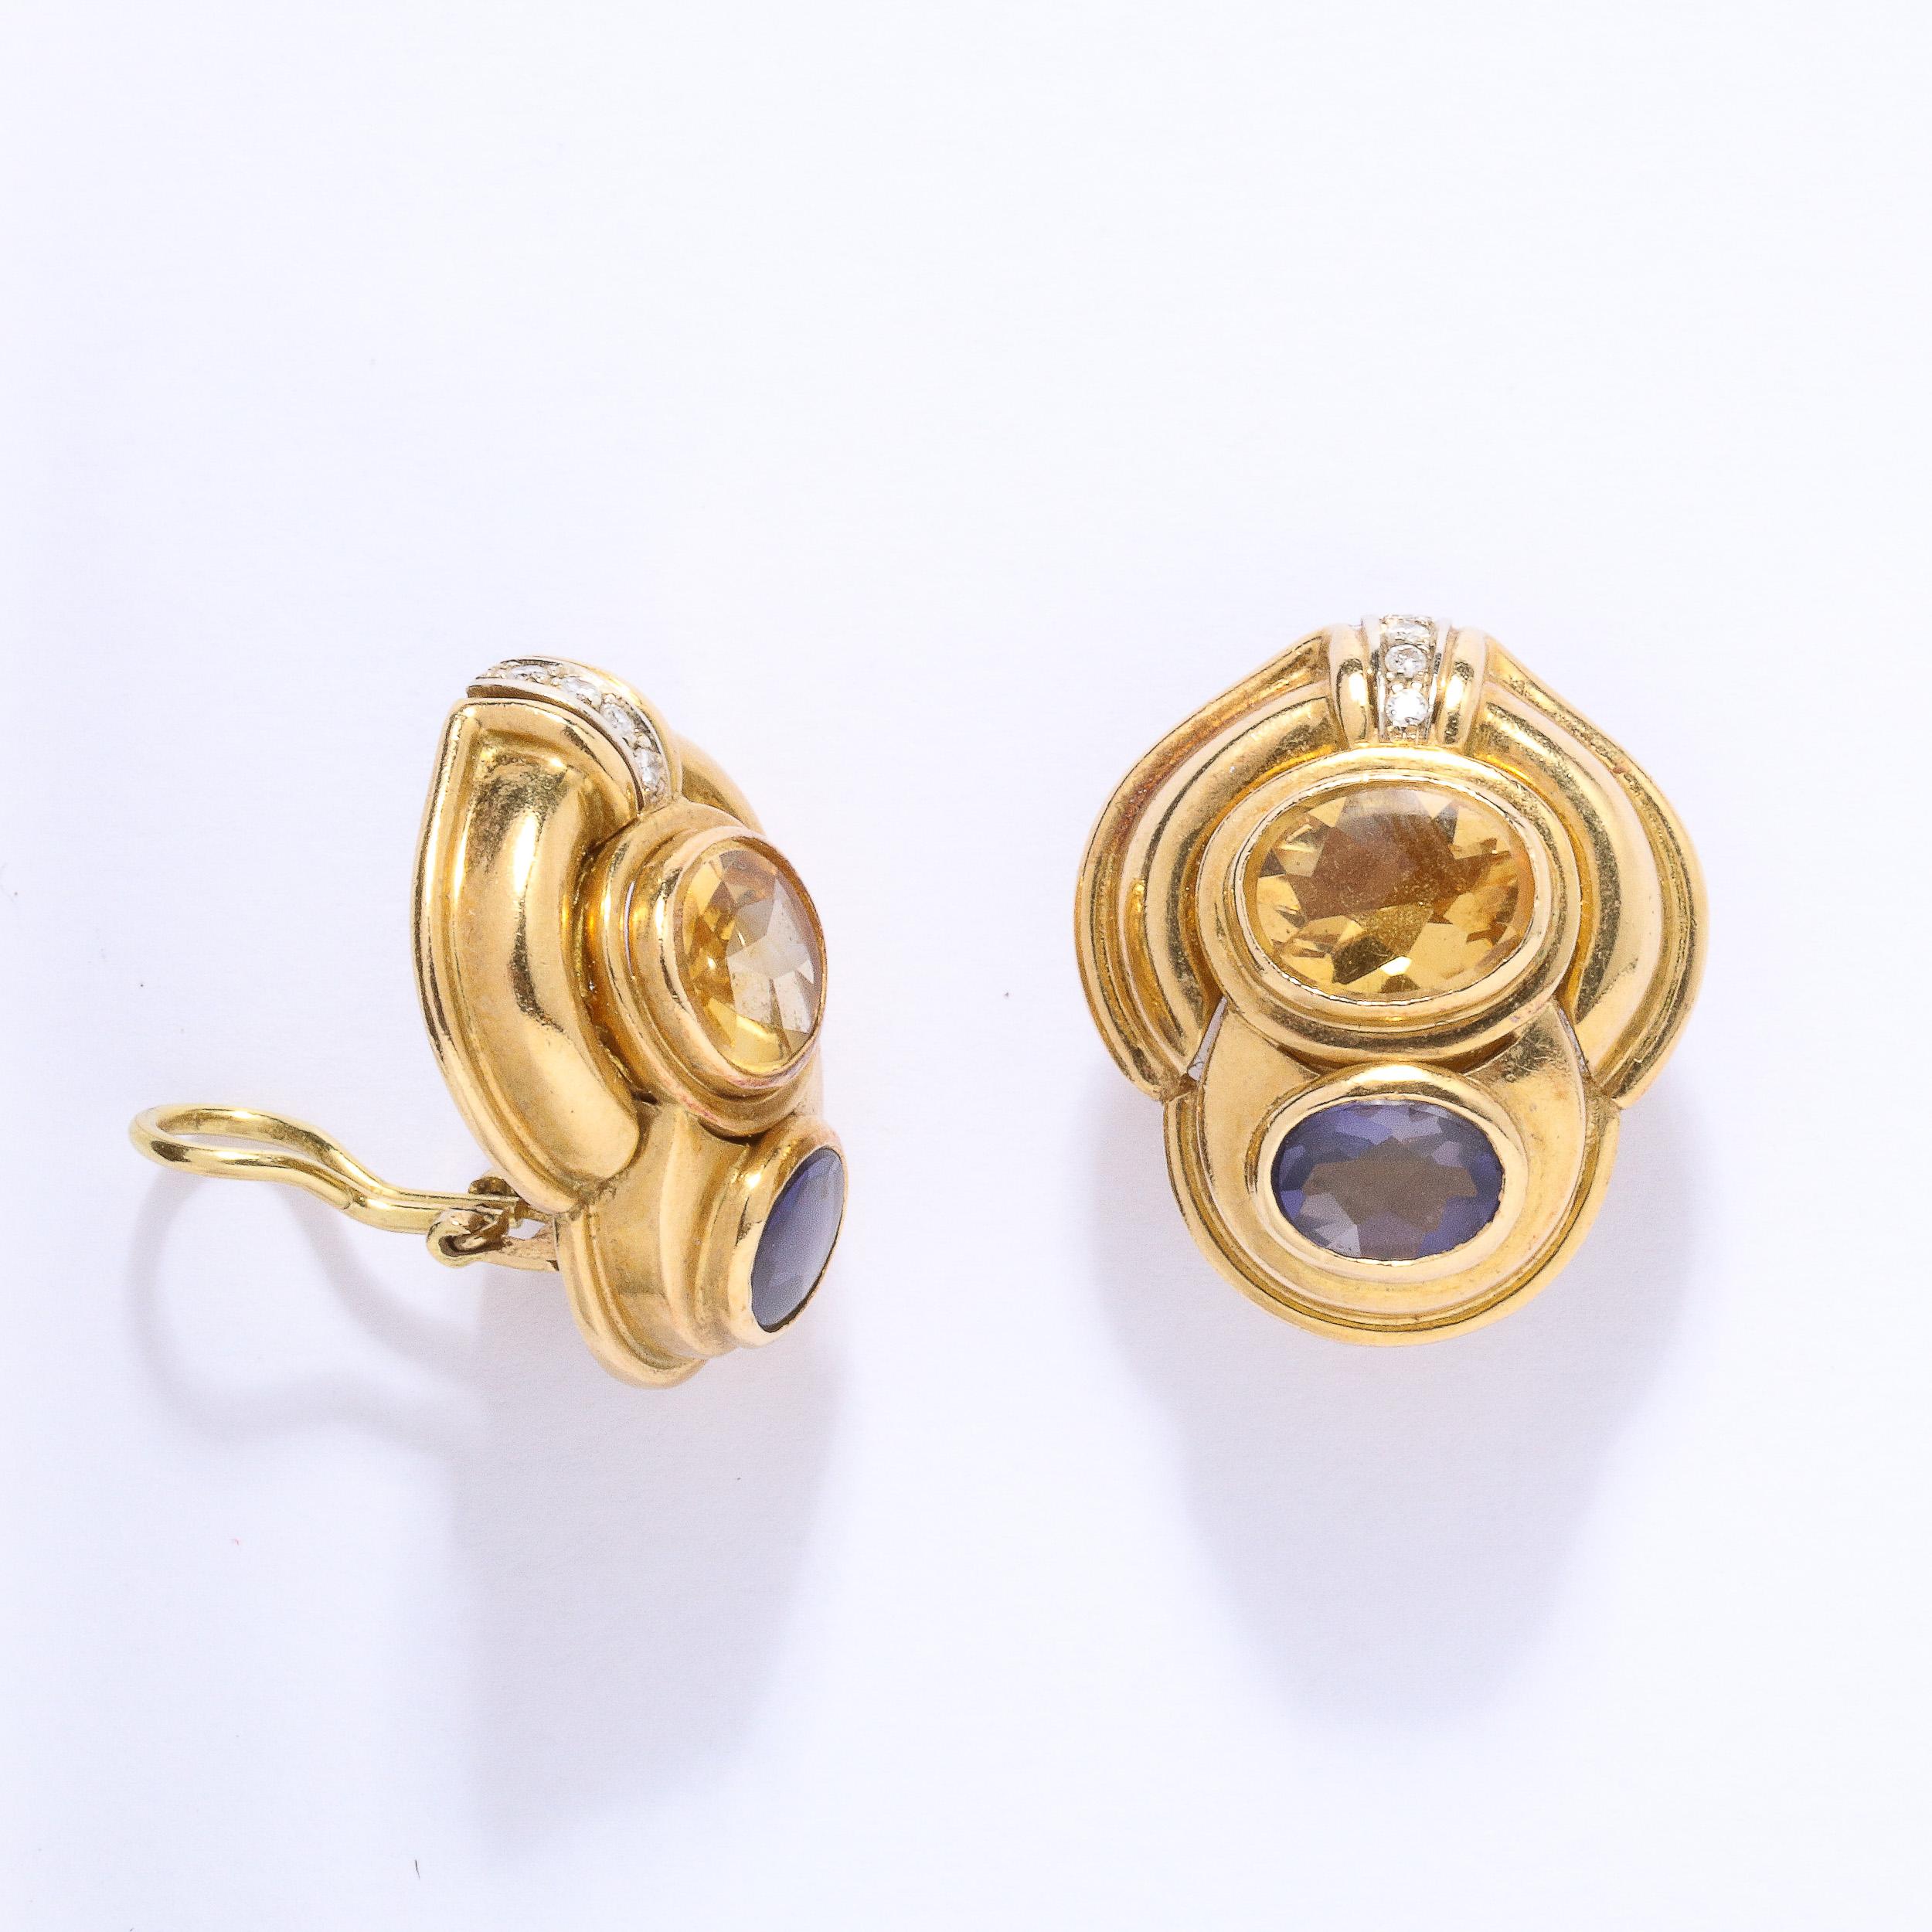 These gorgeous clip on earrings are set with an oval cut citrine and an oval cut Iolite surrounded  in a 18k gold stylized tiered  design which is also set with 4 round diamonds in each. They are marked 18k Italy and the purchaser could easily have